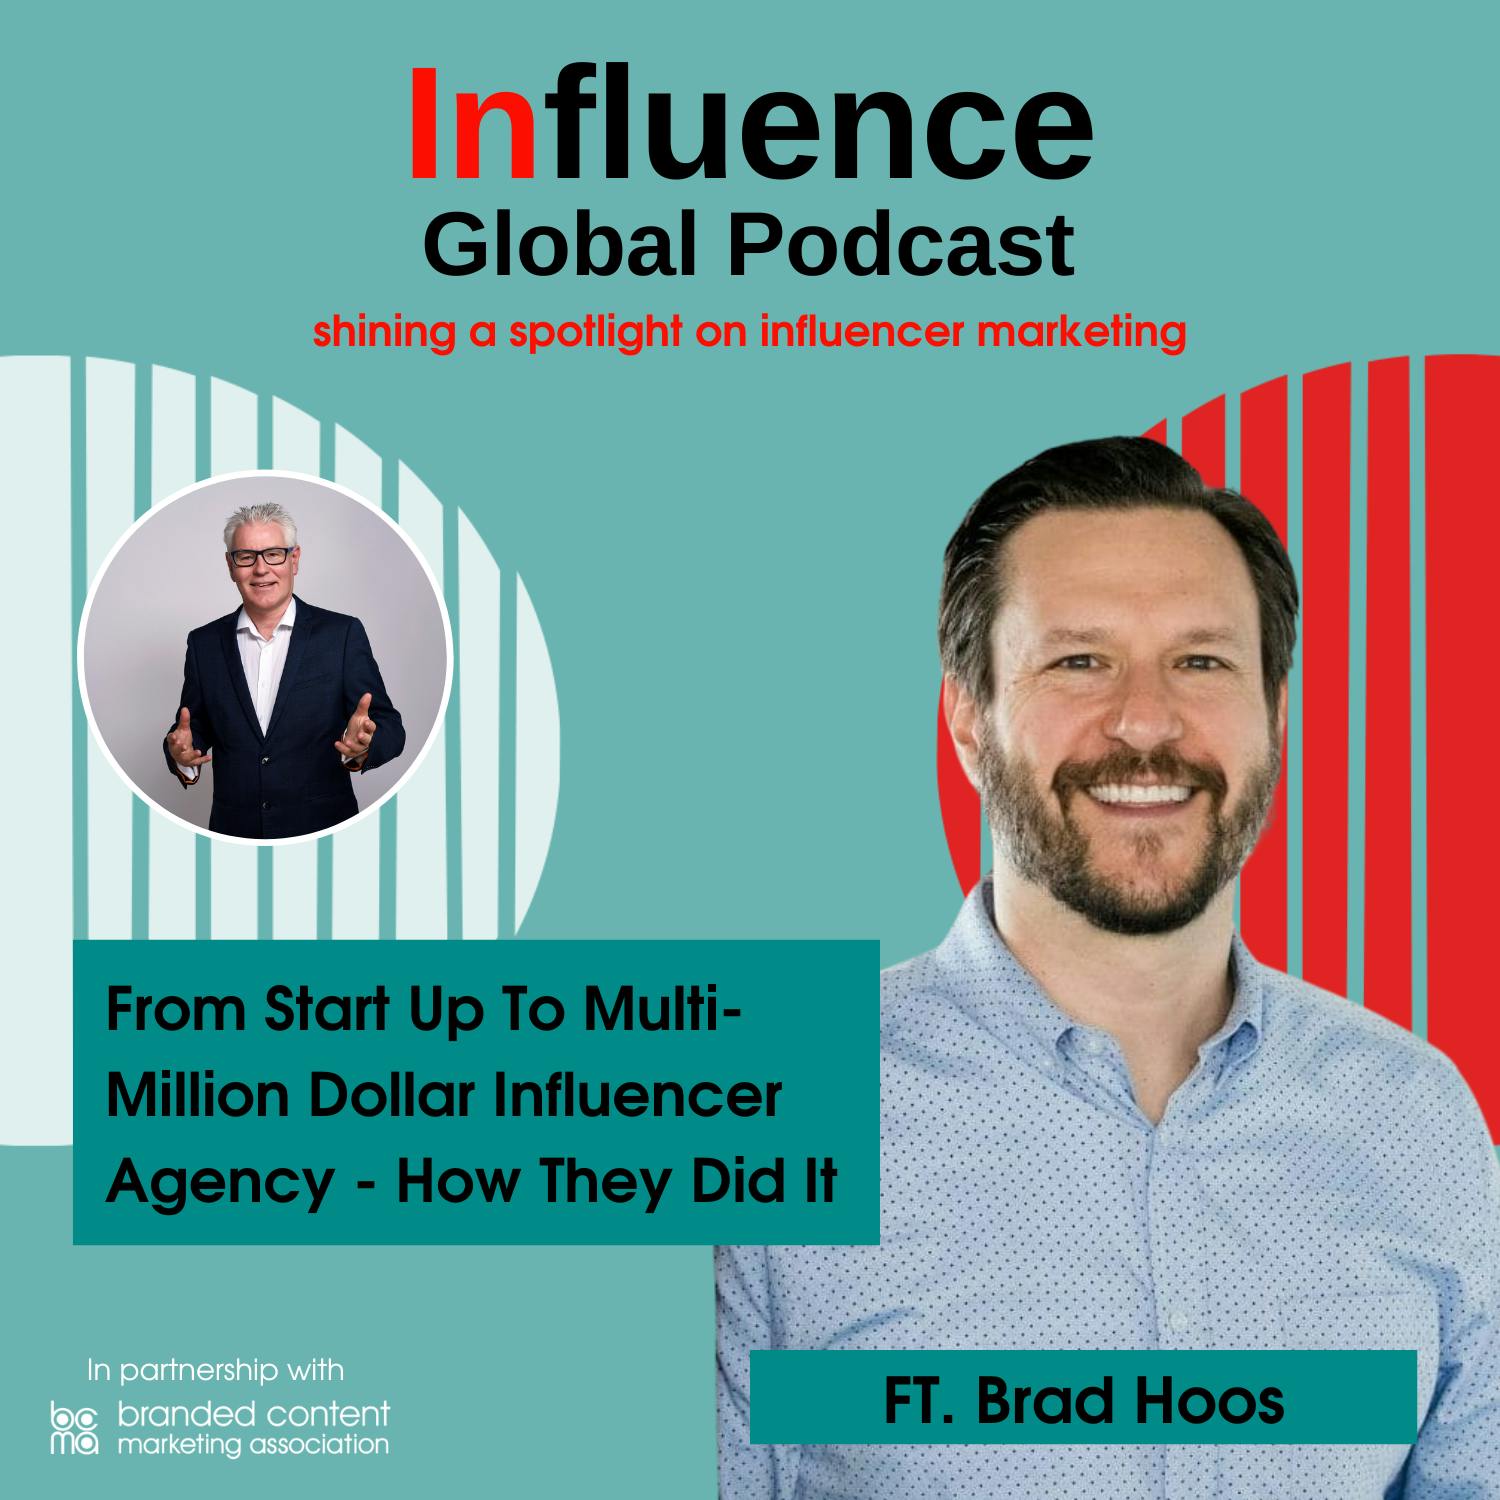 S7 Ep2: From Start Up To Multi-Million Dollar Influencer Agency - How They Did It Ft. Brad Hoos